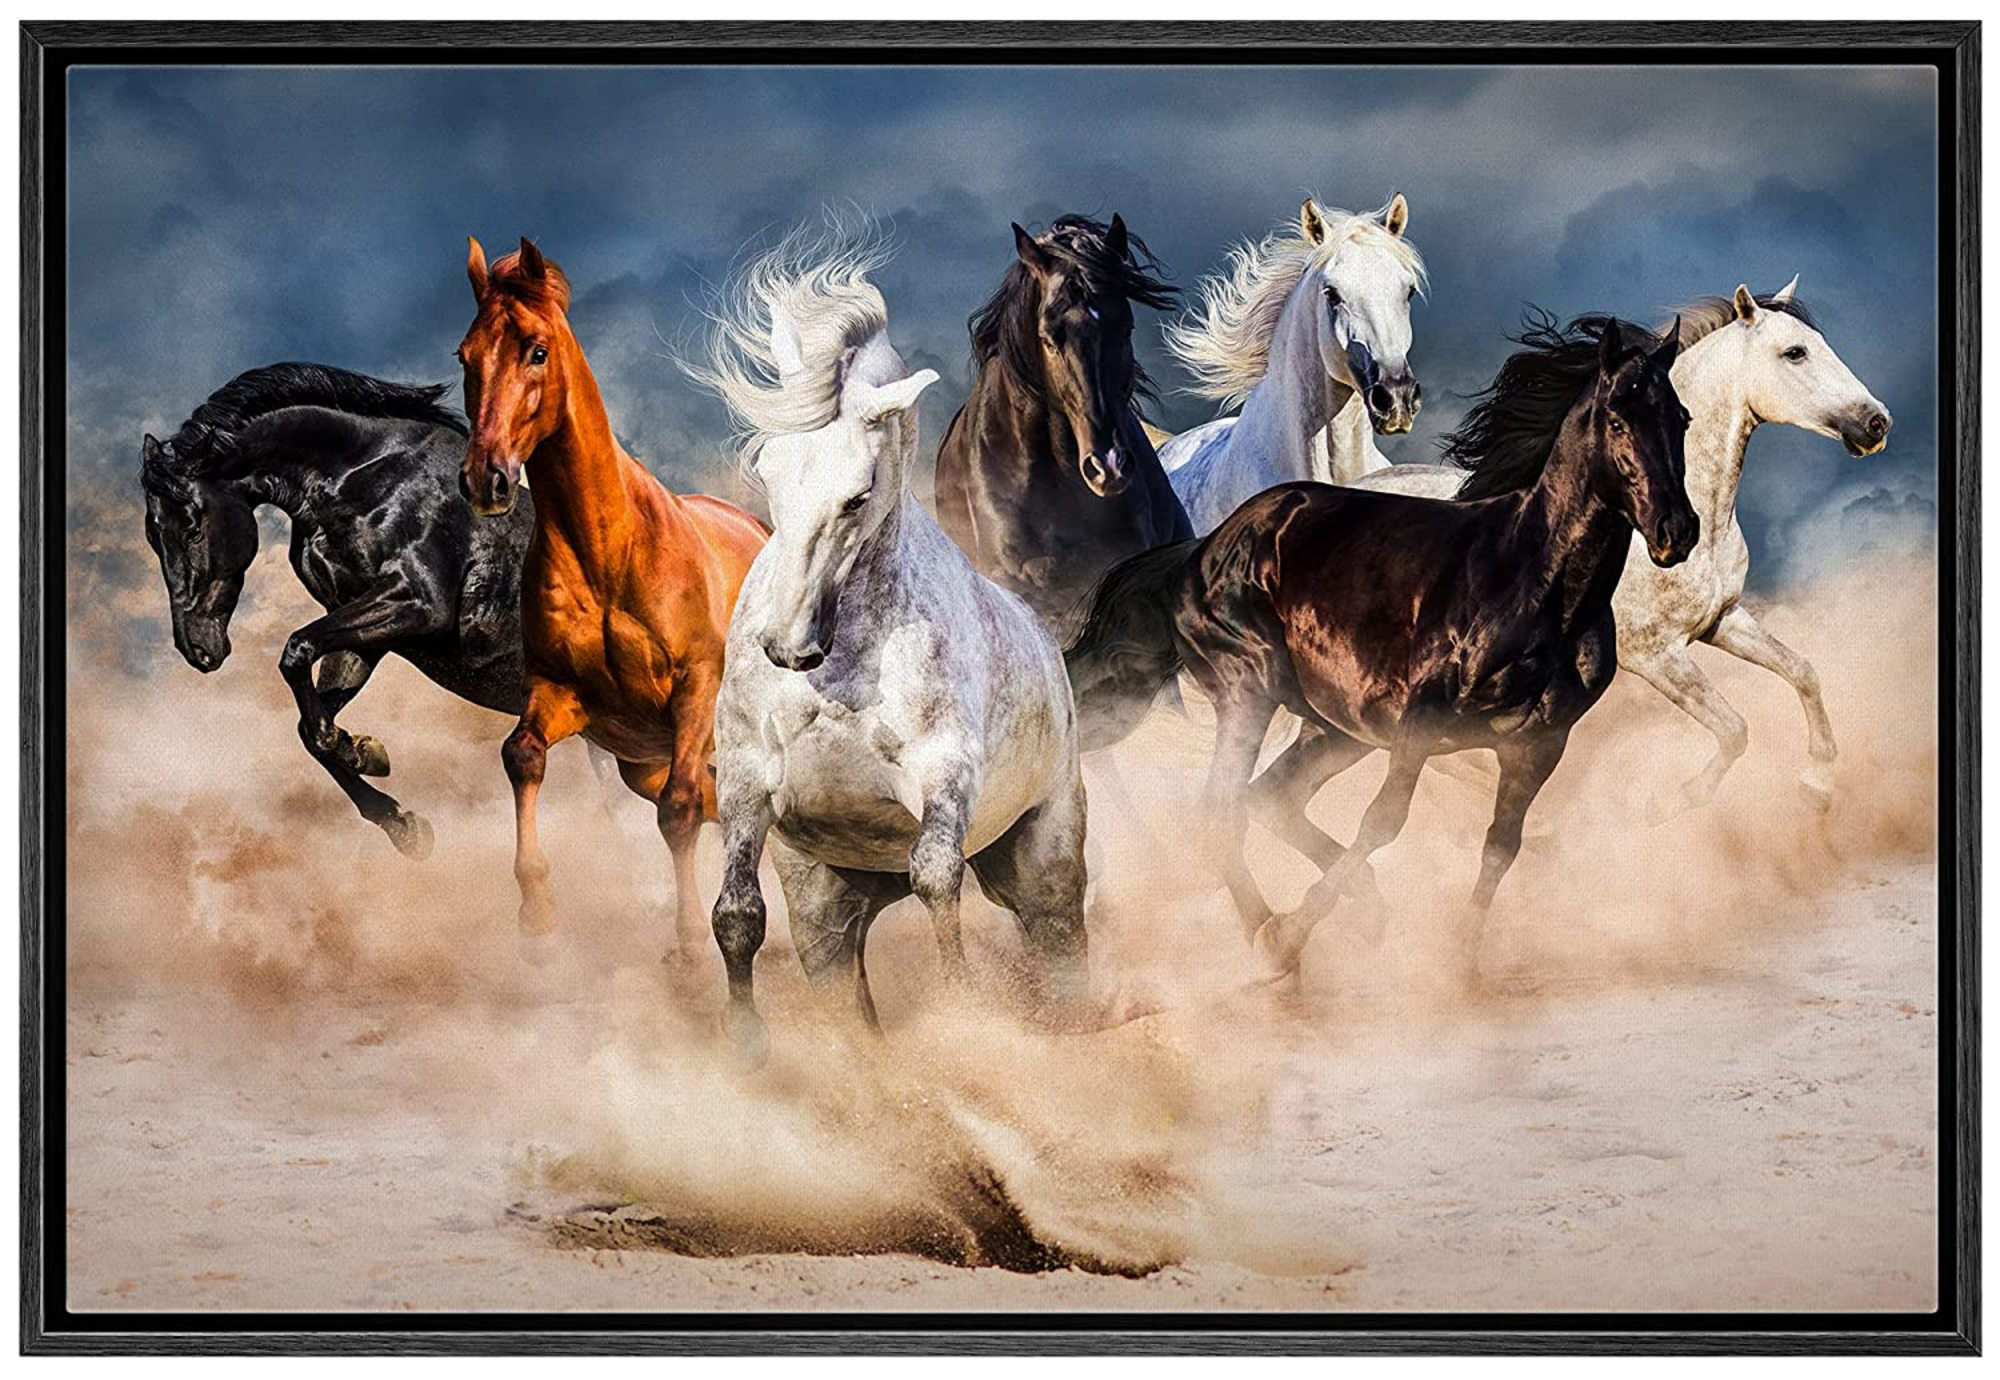 IDEA4WALL Canvas Print Wall Art Southwest Desert Texas Horse Stallions  Animals Nature Photography Realism Rustic Landscape Portrait Wildlife  Country For Living Room, Bedroom, Office - Print | Wayfair